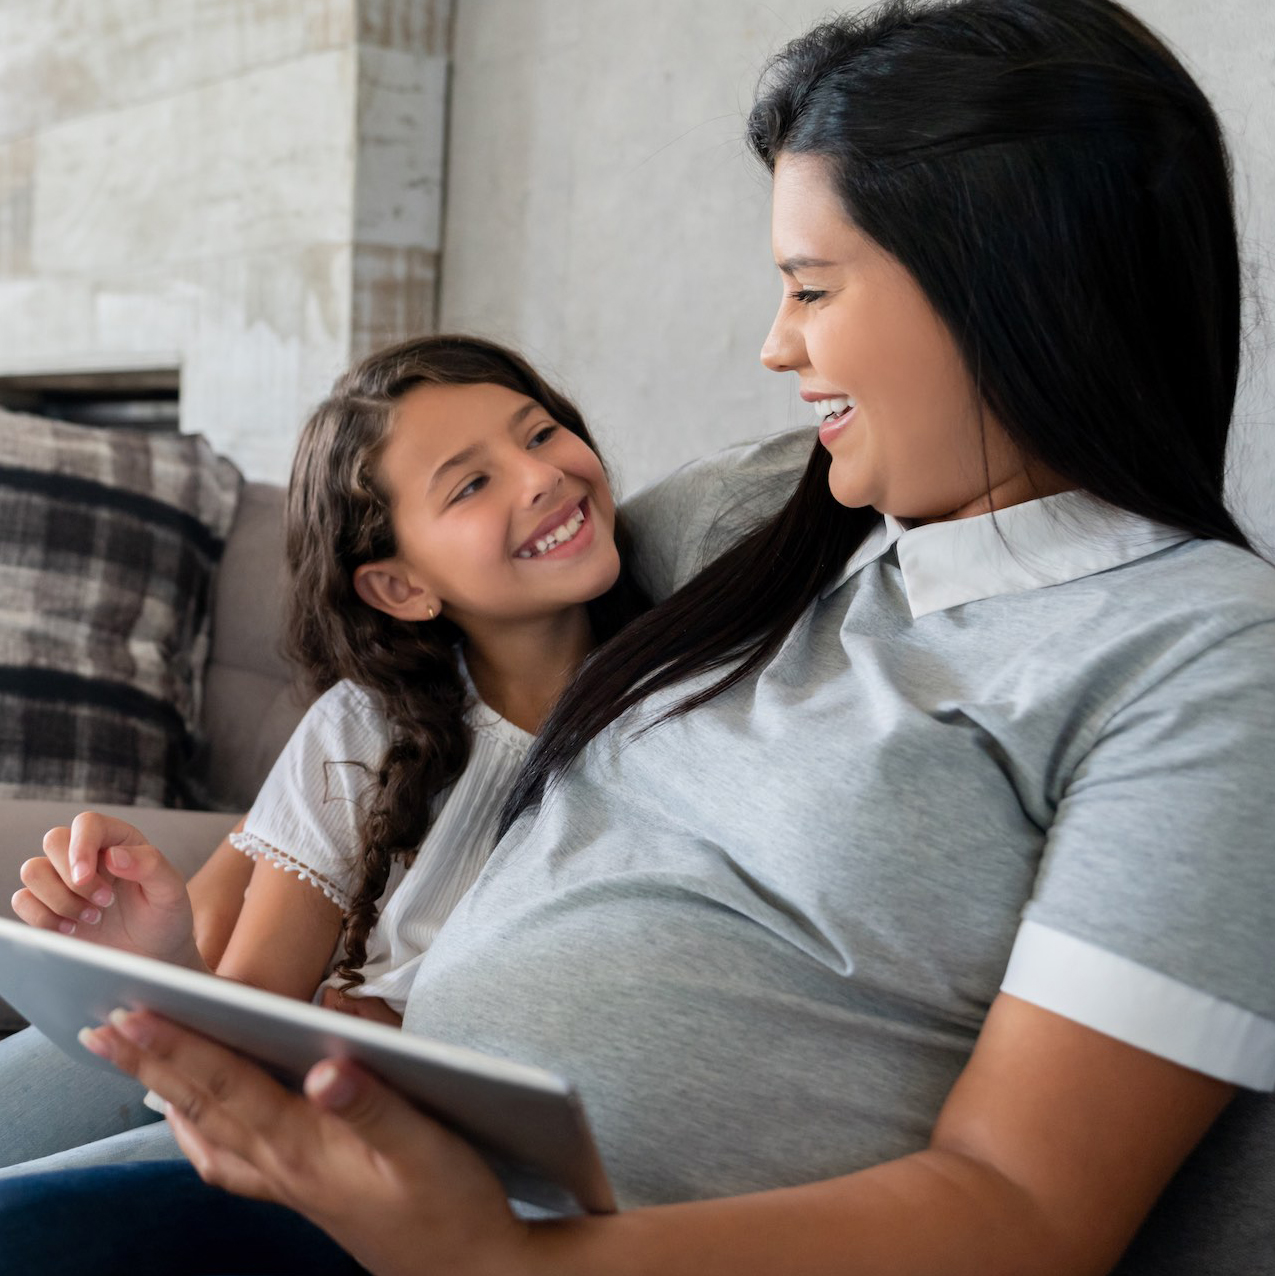 Pregnant mother and daughter talking while using a tablet.